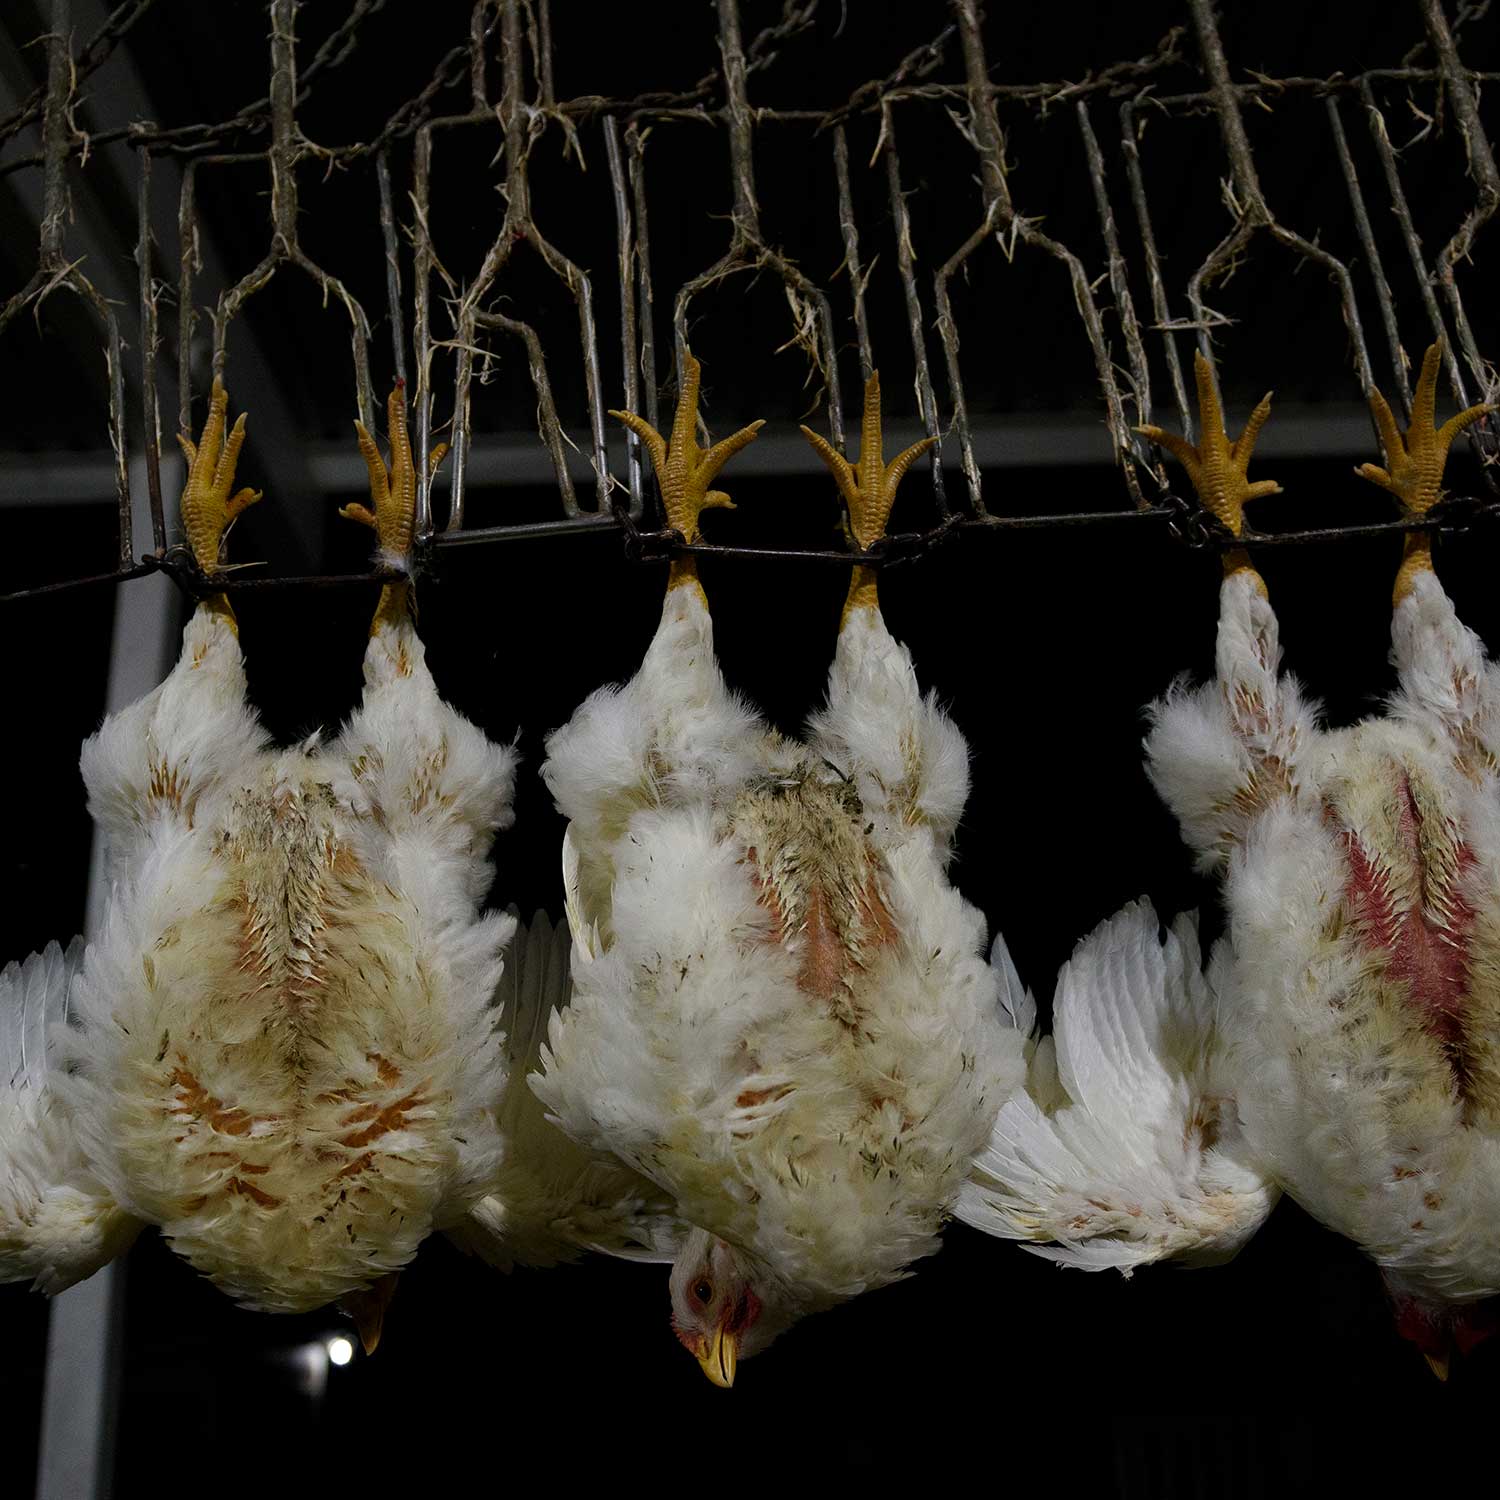 chickens hung upside down in slaughterhouse